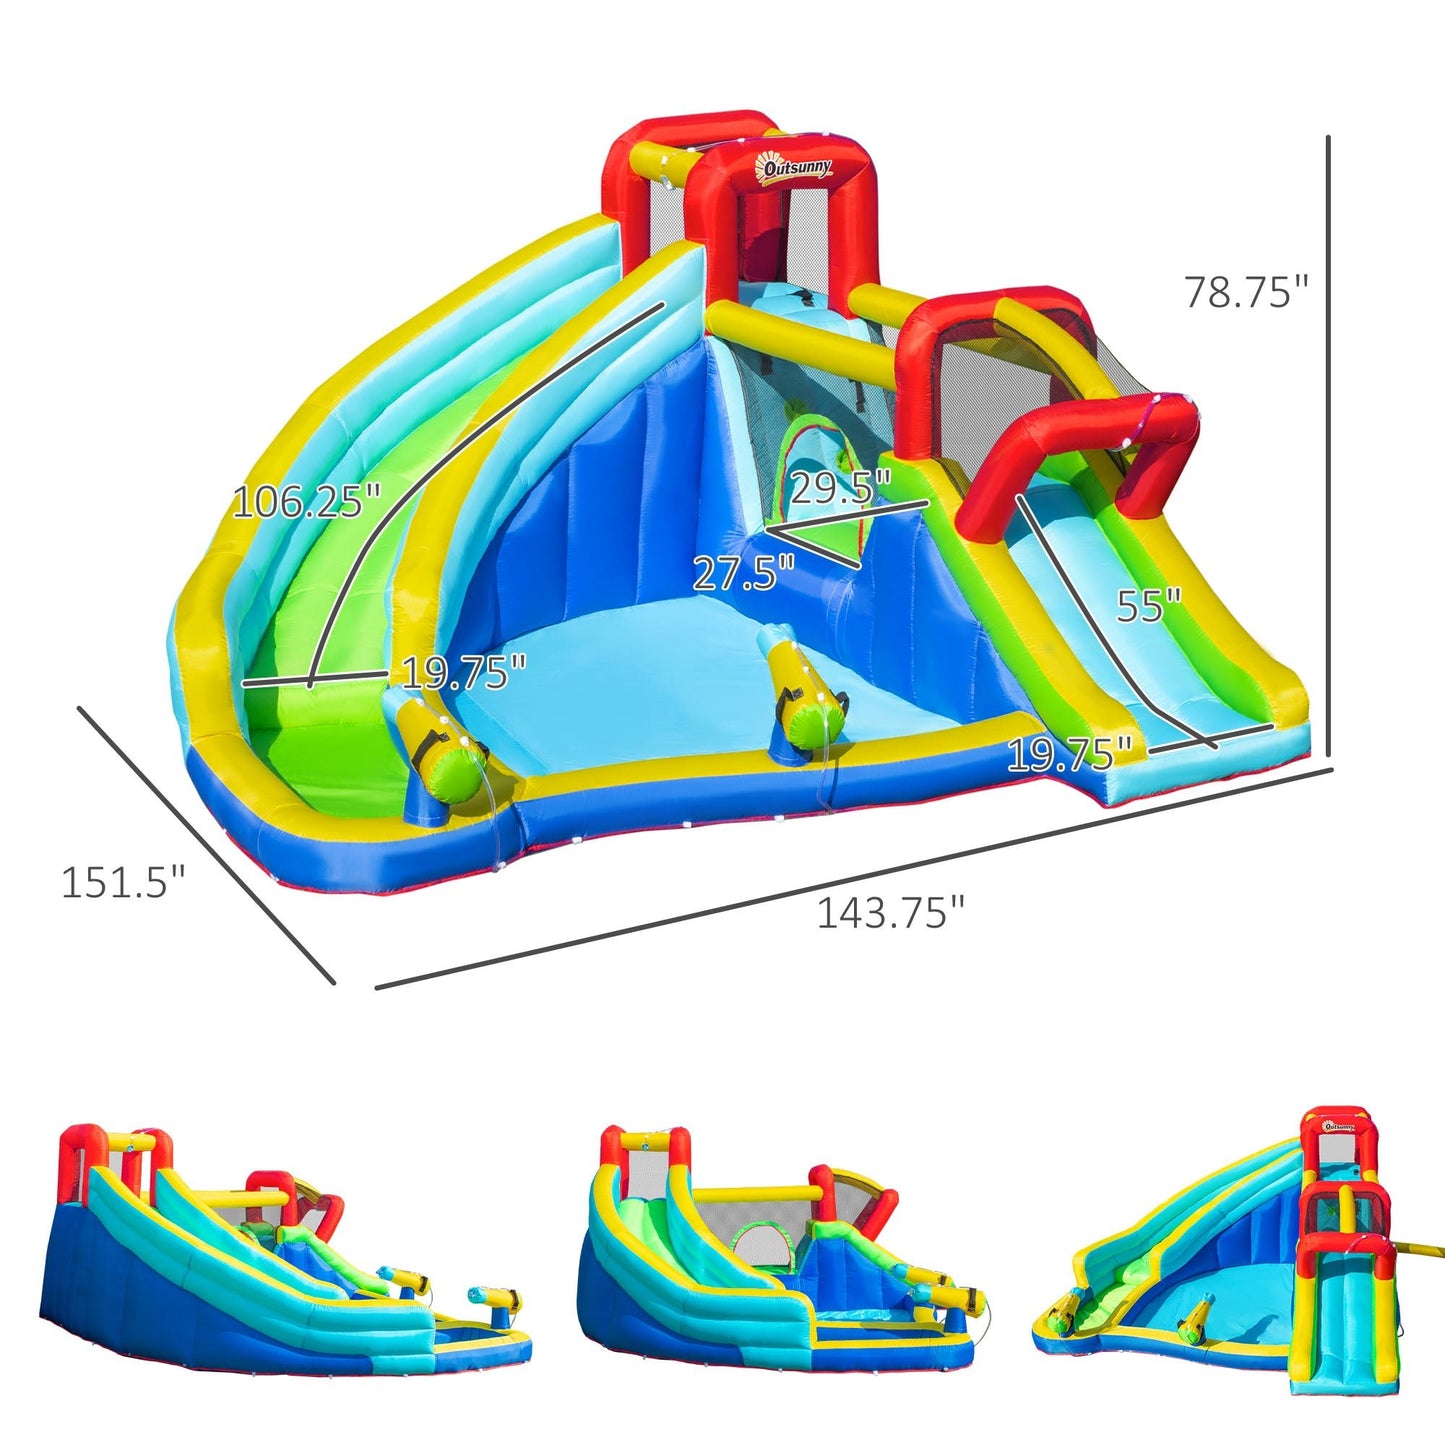 Miscellaneous-5-in-1 Water Slide Kids Inflatable Bounce House Water Park Jumping Castle Includes Trampoline Slide Water Pool without Air Blower - Outdoor Style Company